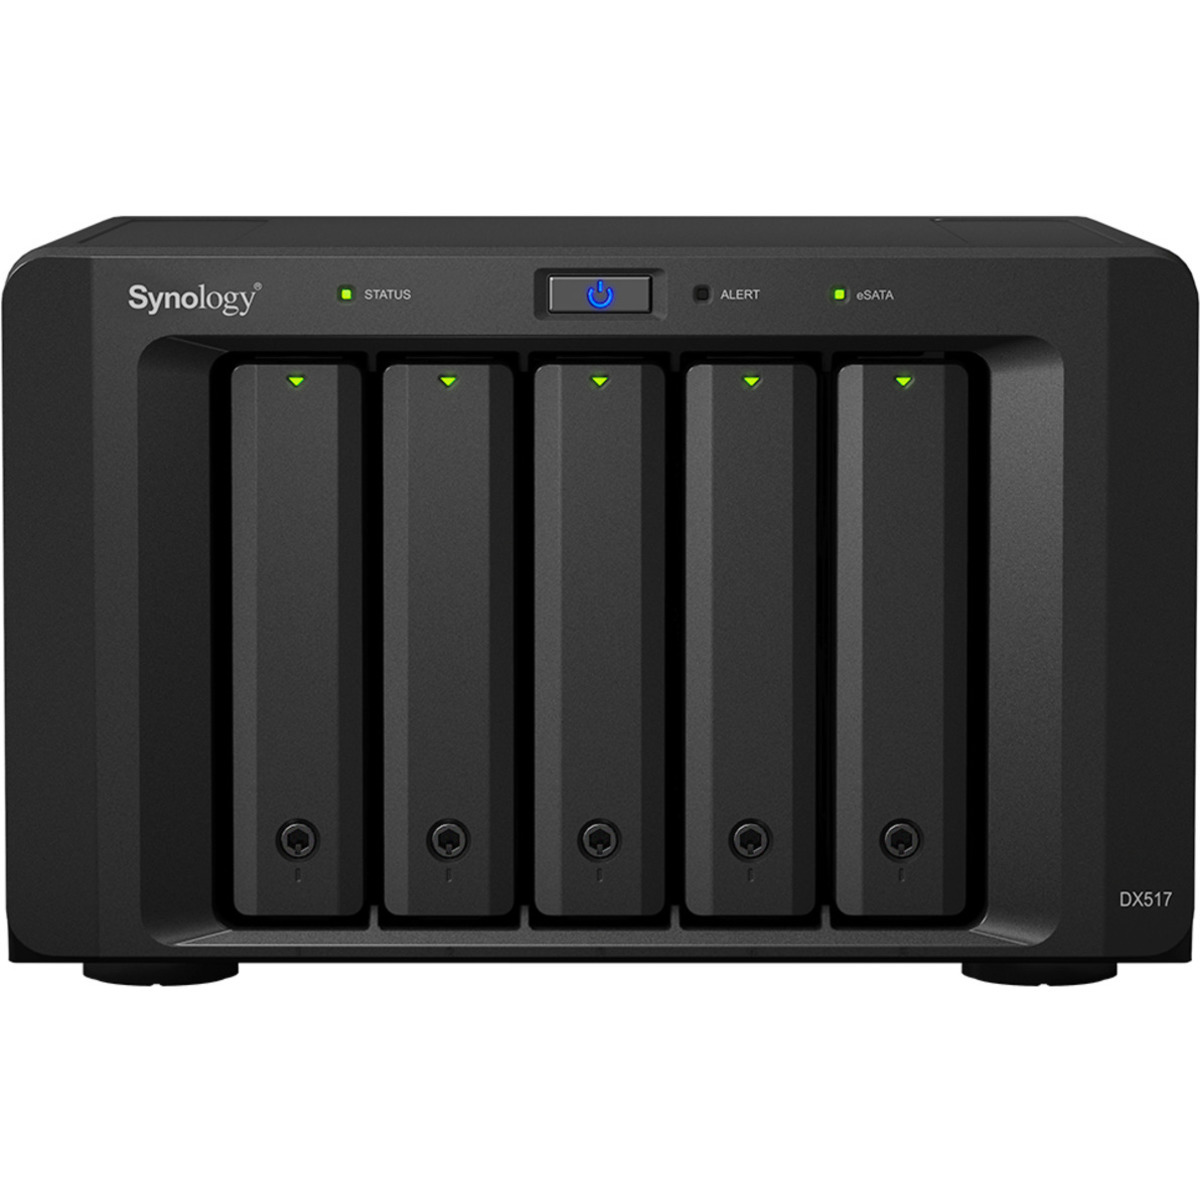 Synology DX517 External Expansion Drive 2.5tb 5-Bay Desktop Multimedia / Power User / Business Expansion Enclosure 5x500gb Western Digital Red SA500 WDS500G1R0A 2.5 560/530MB/s SATA 6Gb/s SSD NAS Class Drives Installed - Burn-In Tested DX517 External Expansion Drive